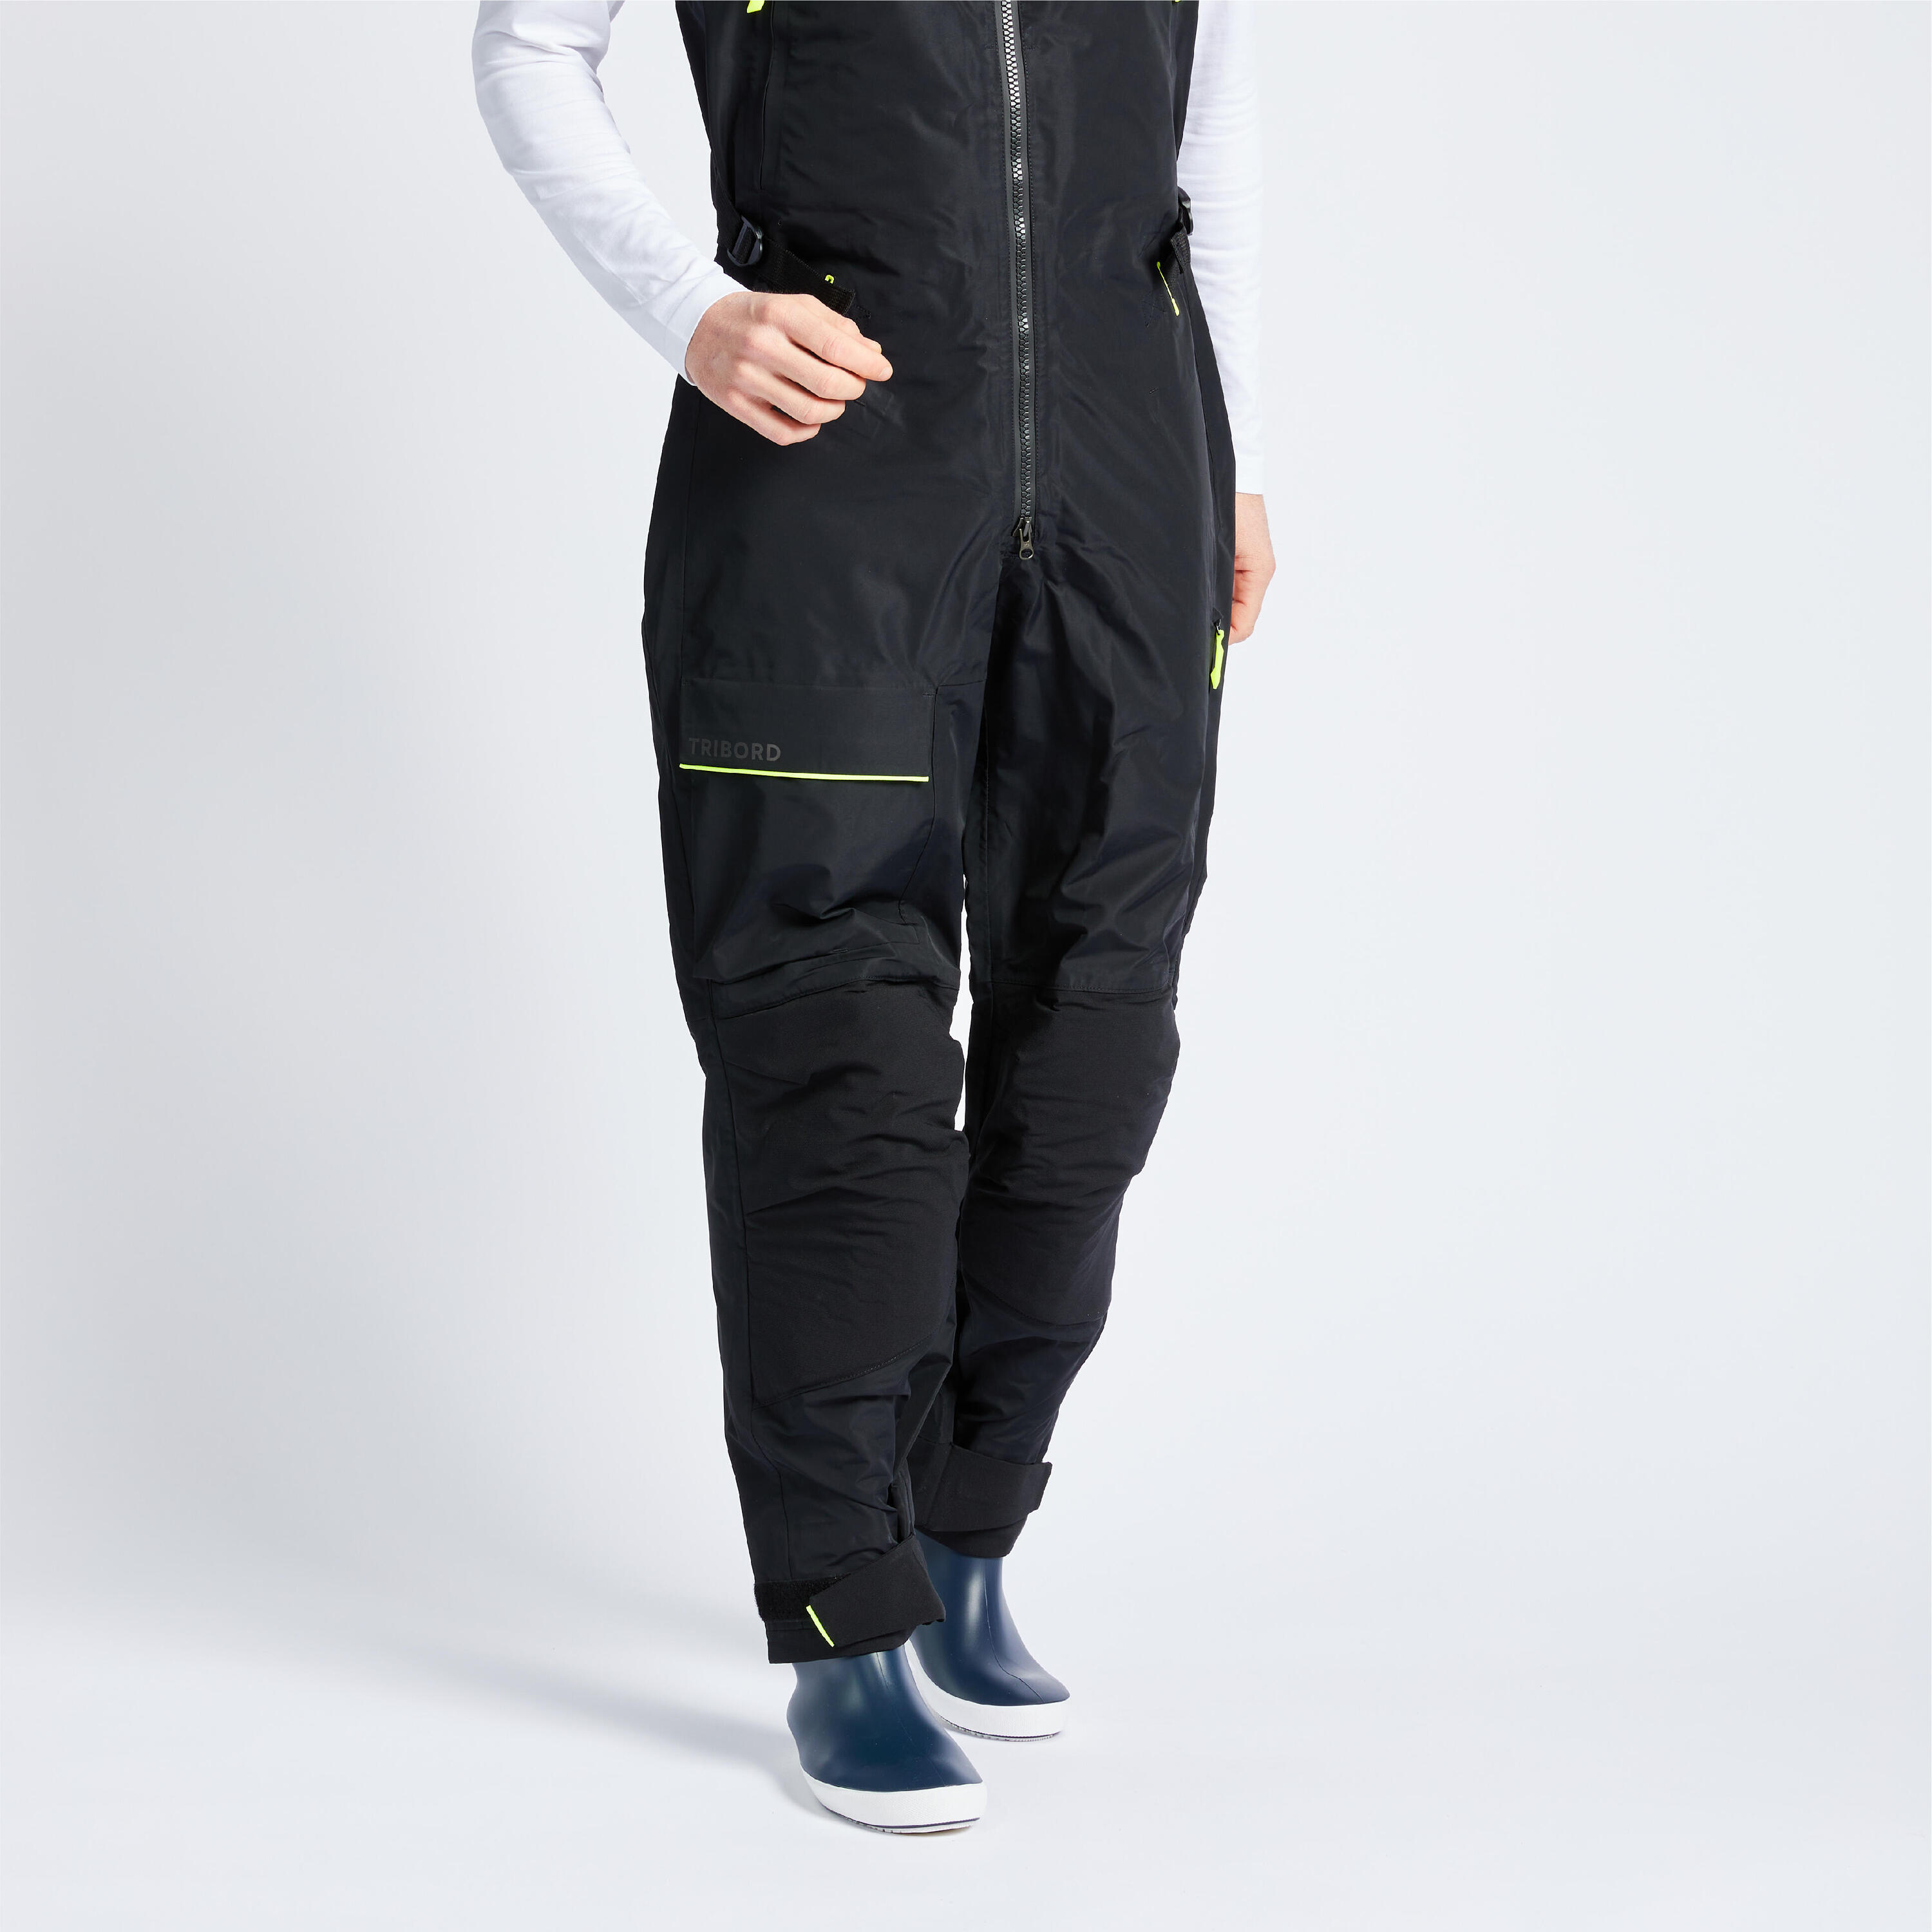 Adult Sailing overalls - Offshore 900 Black 5/12